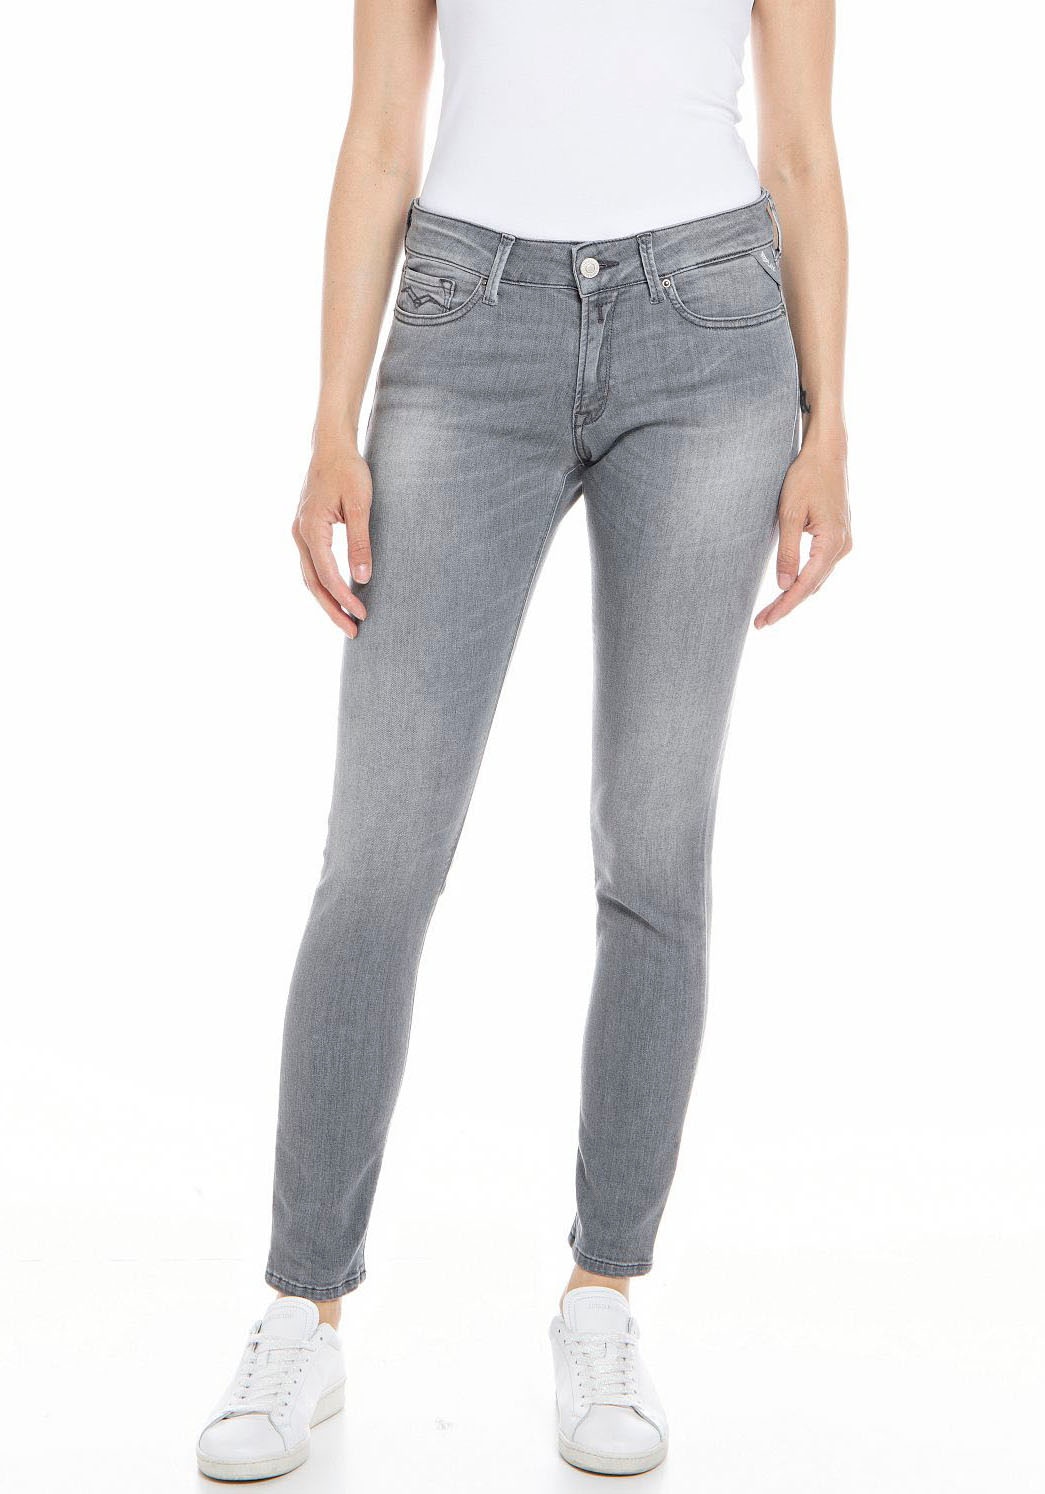 Replay Skinny-fit-Jeans »NEW kaufen Ankle-Länge online LUZ«, in